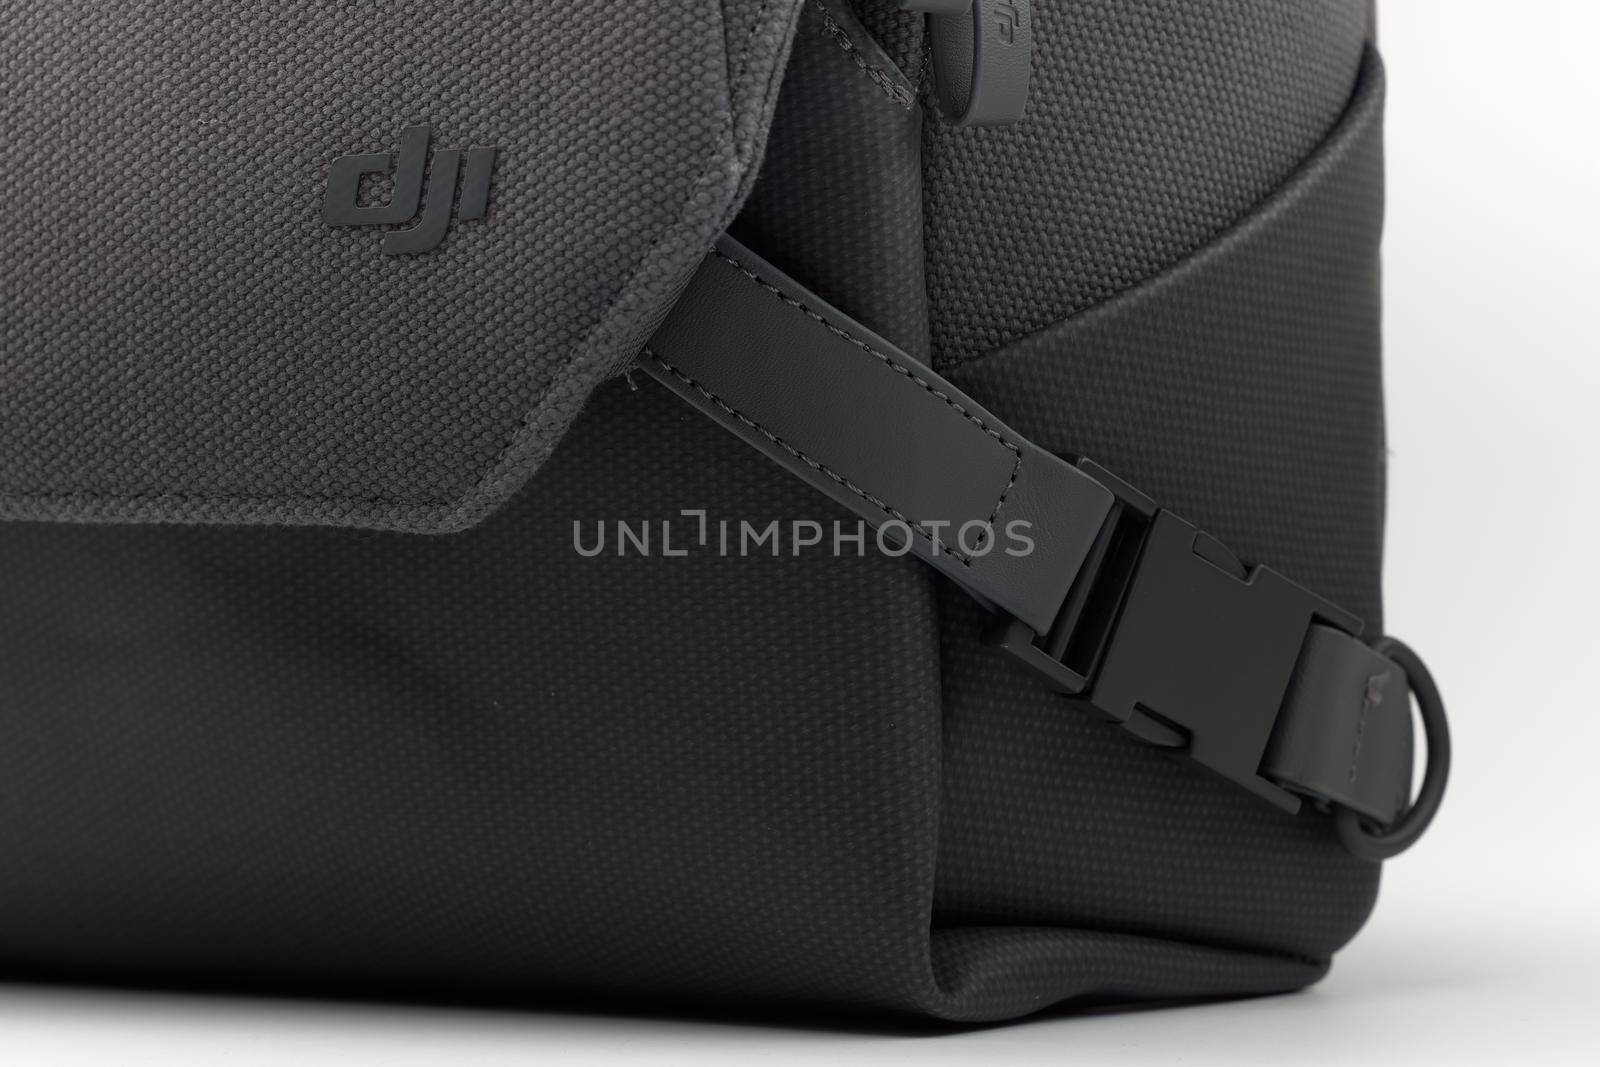 New DJI Mavic 3 Drone bag isolated on white. Accessory for carrying and storing the quadcopter. DJI world leader developer and manufacturers in UA. 17.12.2021, Rostov region, Russia.